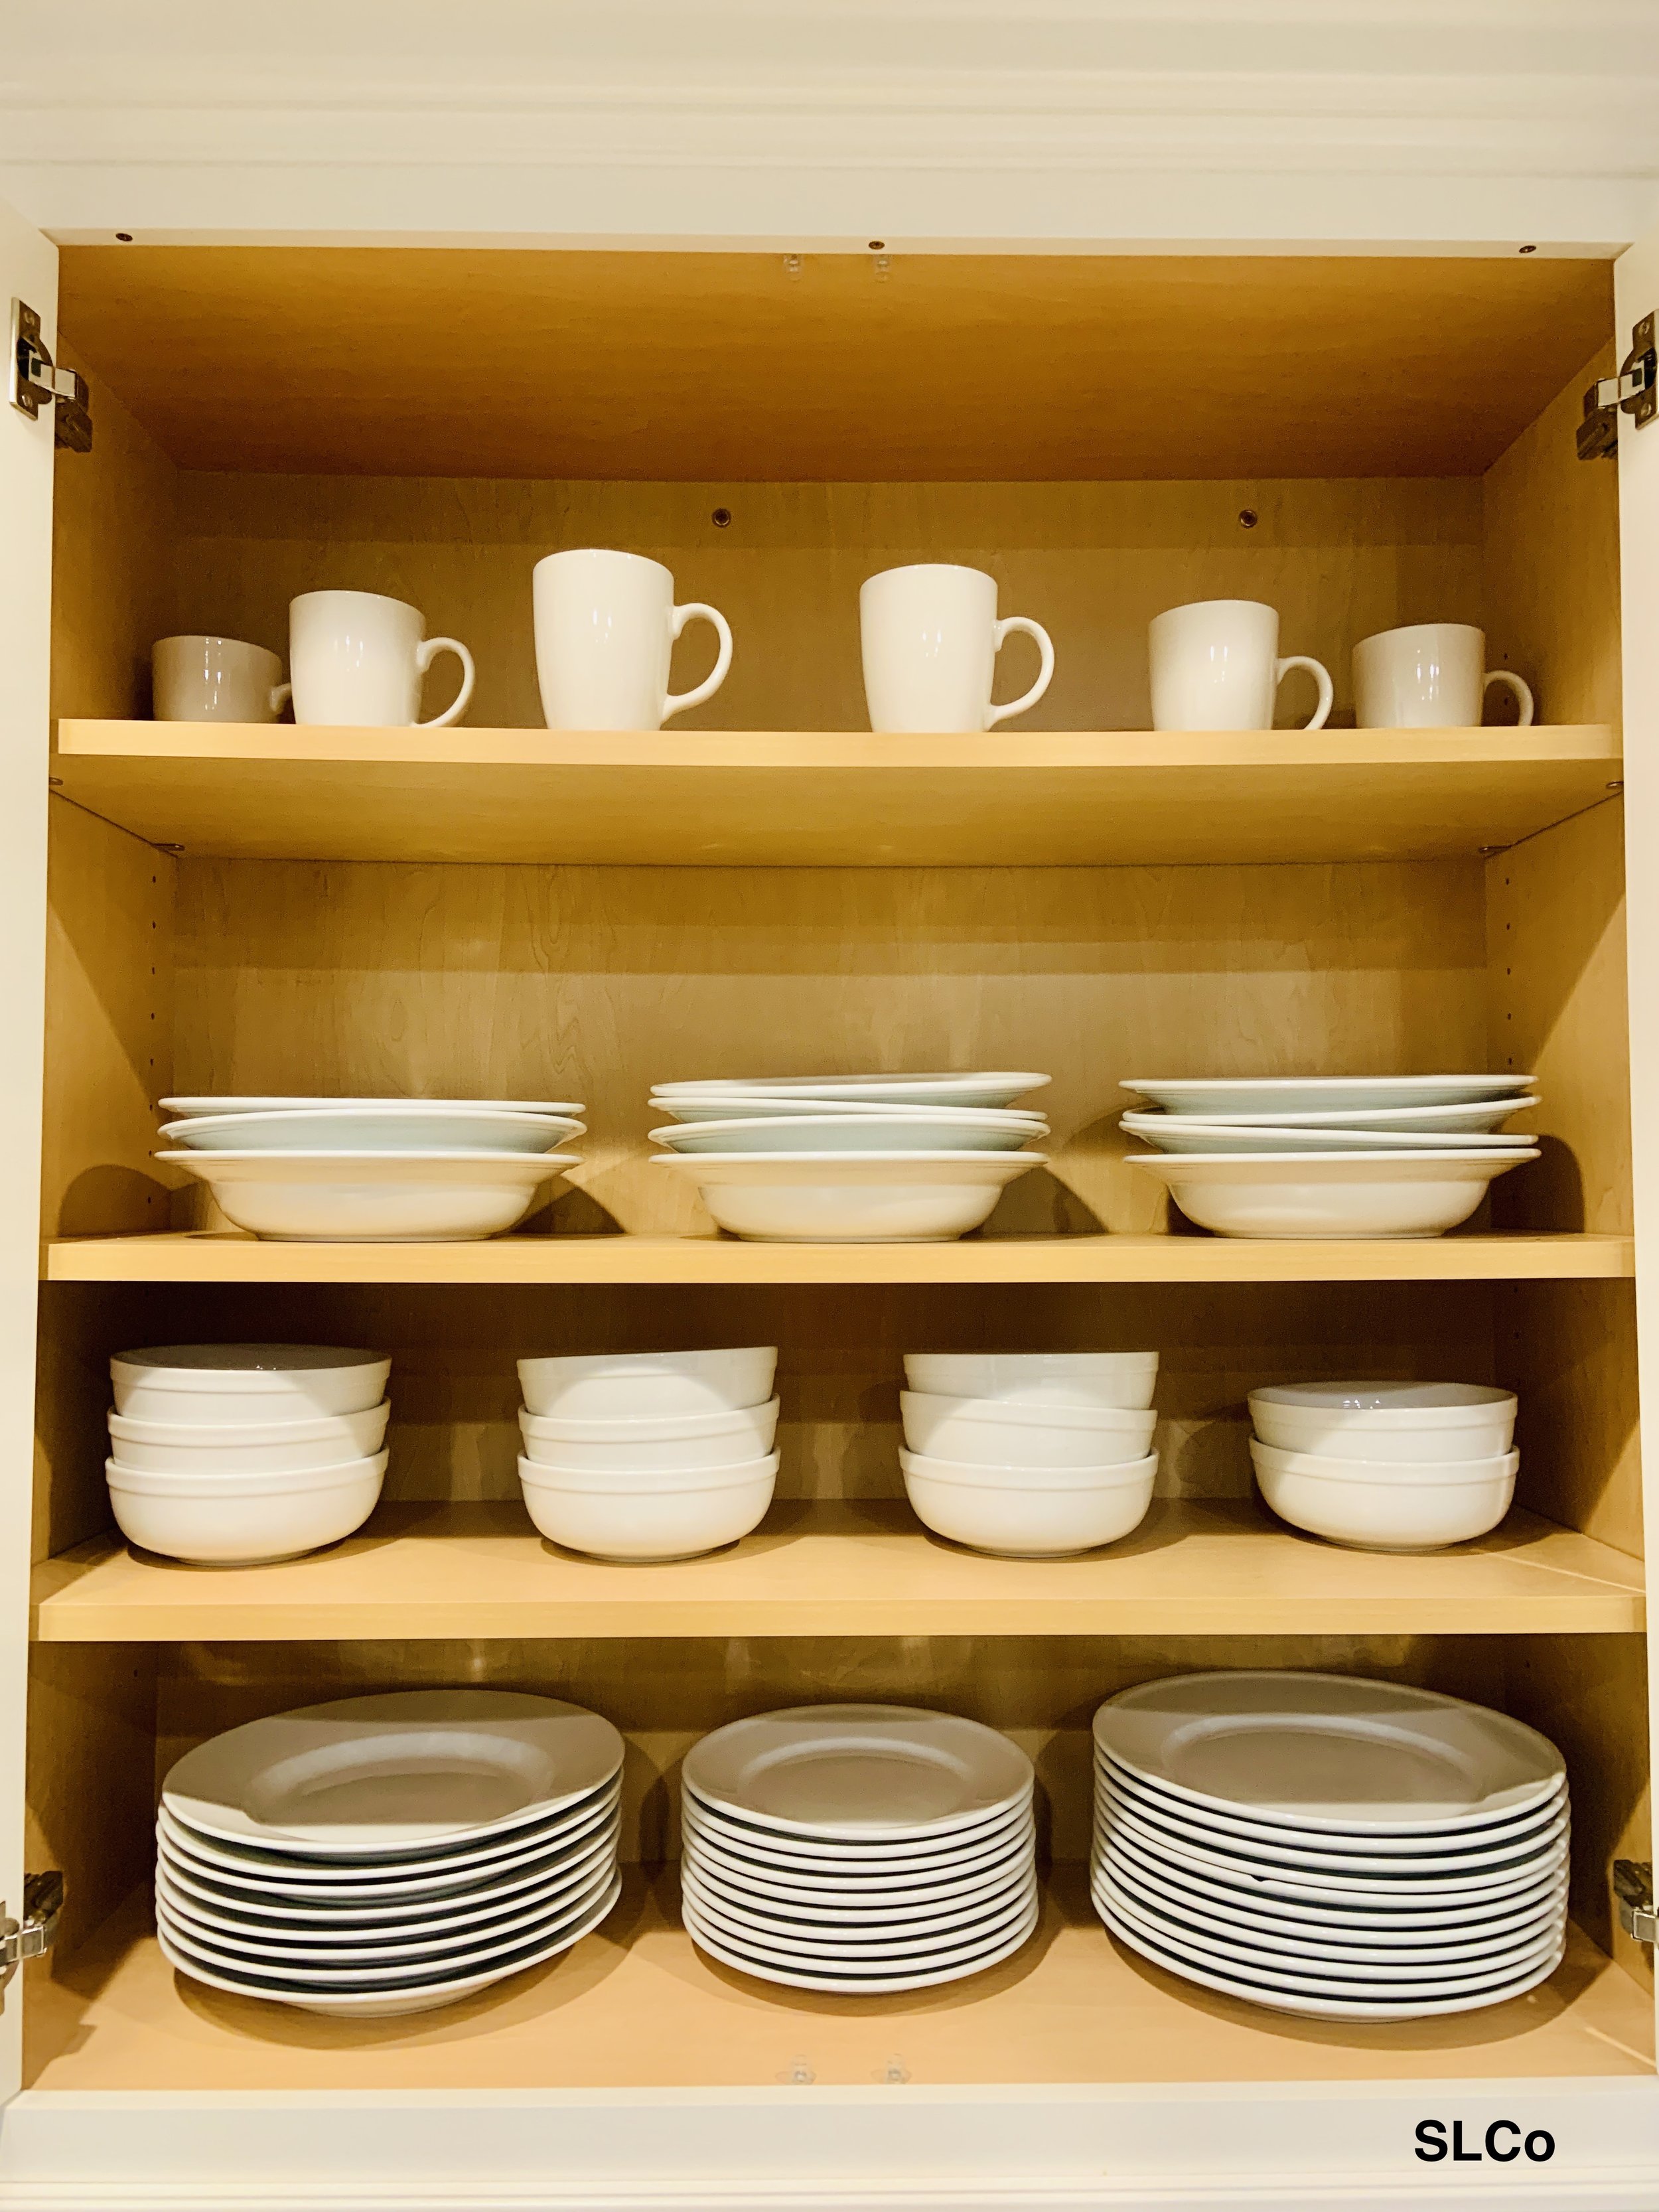 4 wooden shelves in a cabinet with bowls and mugs places spaced apart